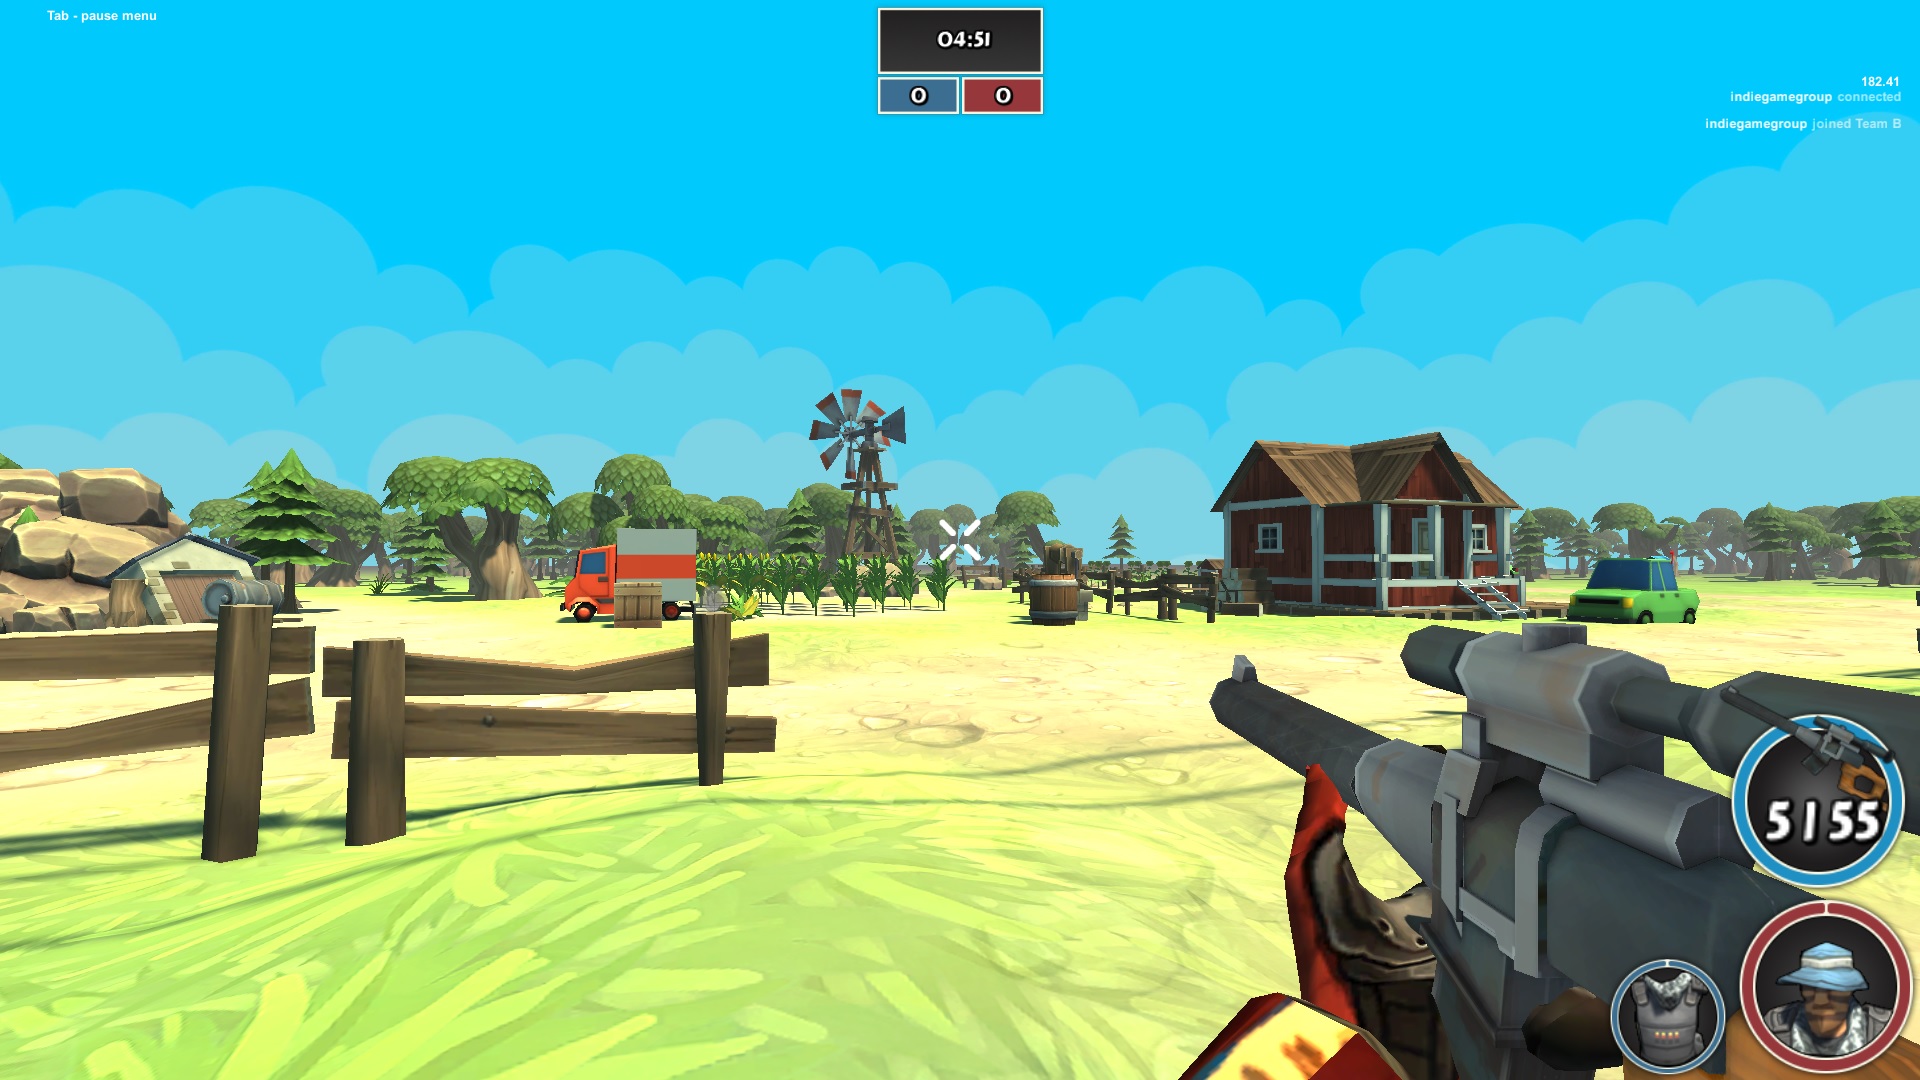 An Indie First Person Shooter game